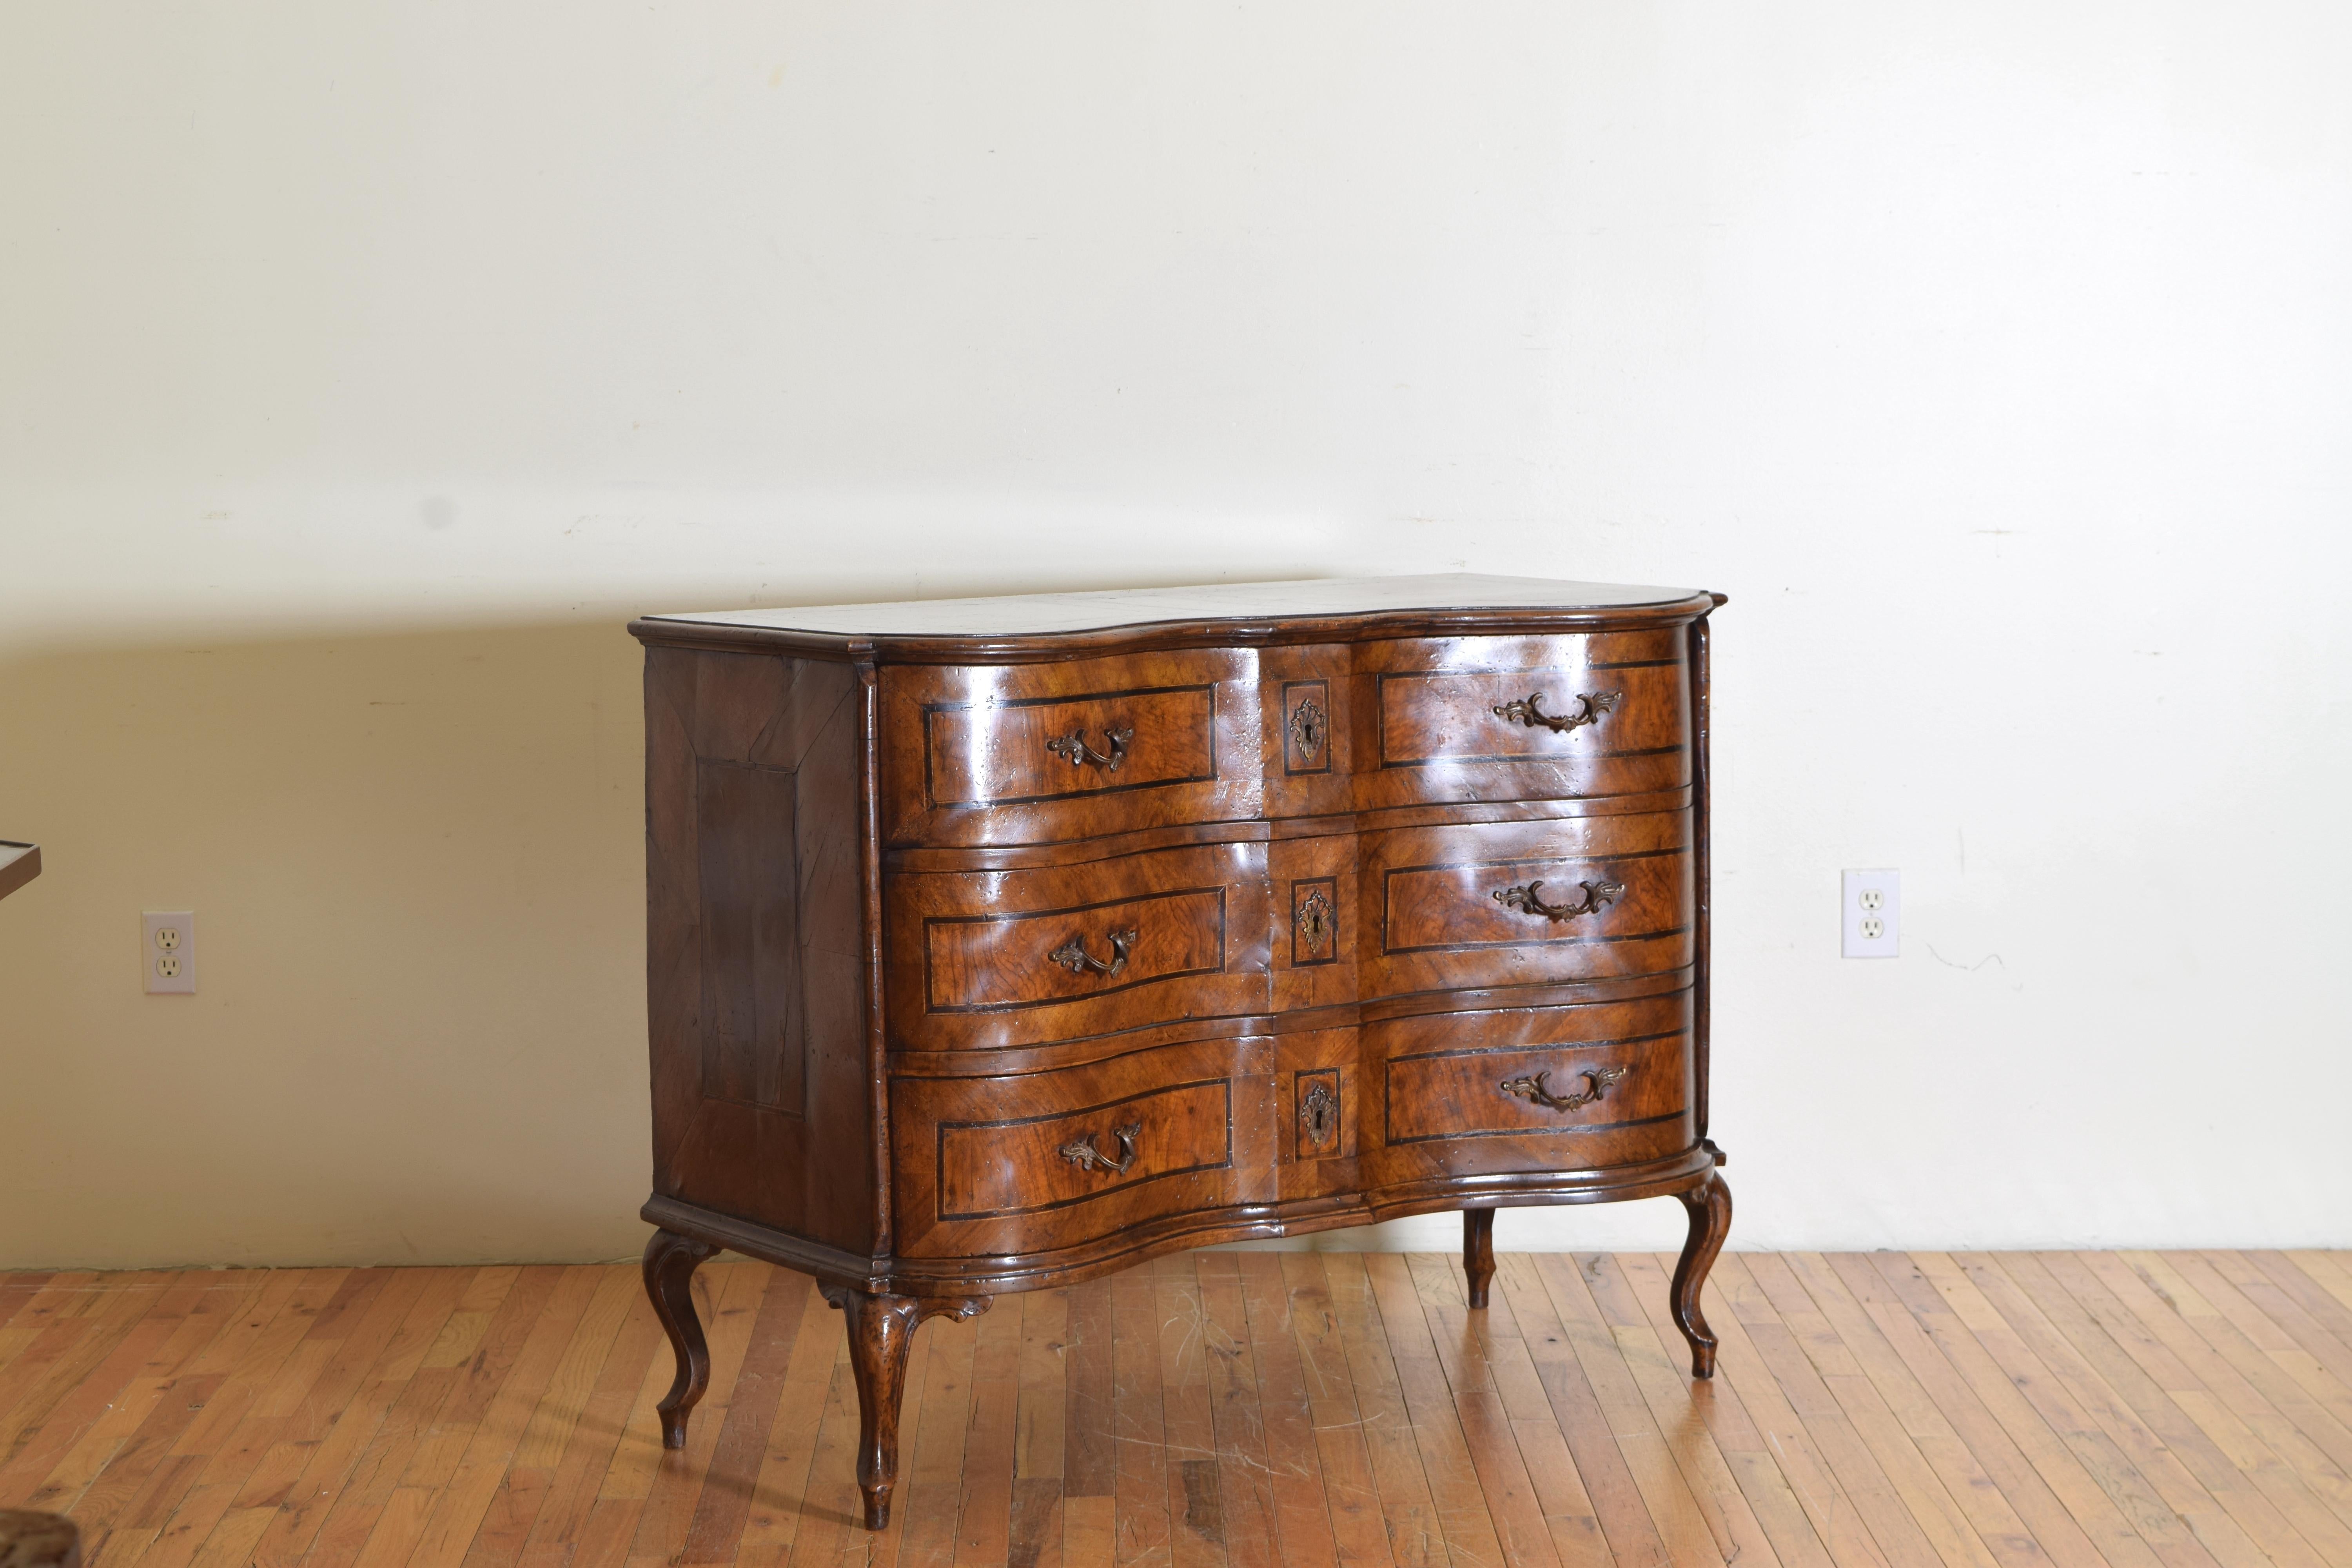 Finely crafted, the shaped top, a cross between a bow front and a serpentine front with an inlaid patterned border within a ground of beautiful burl walnut veneer, the conforming case housing three drawers all with patterned inlay and burl walnut